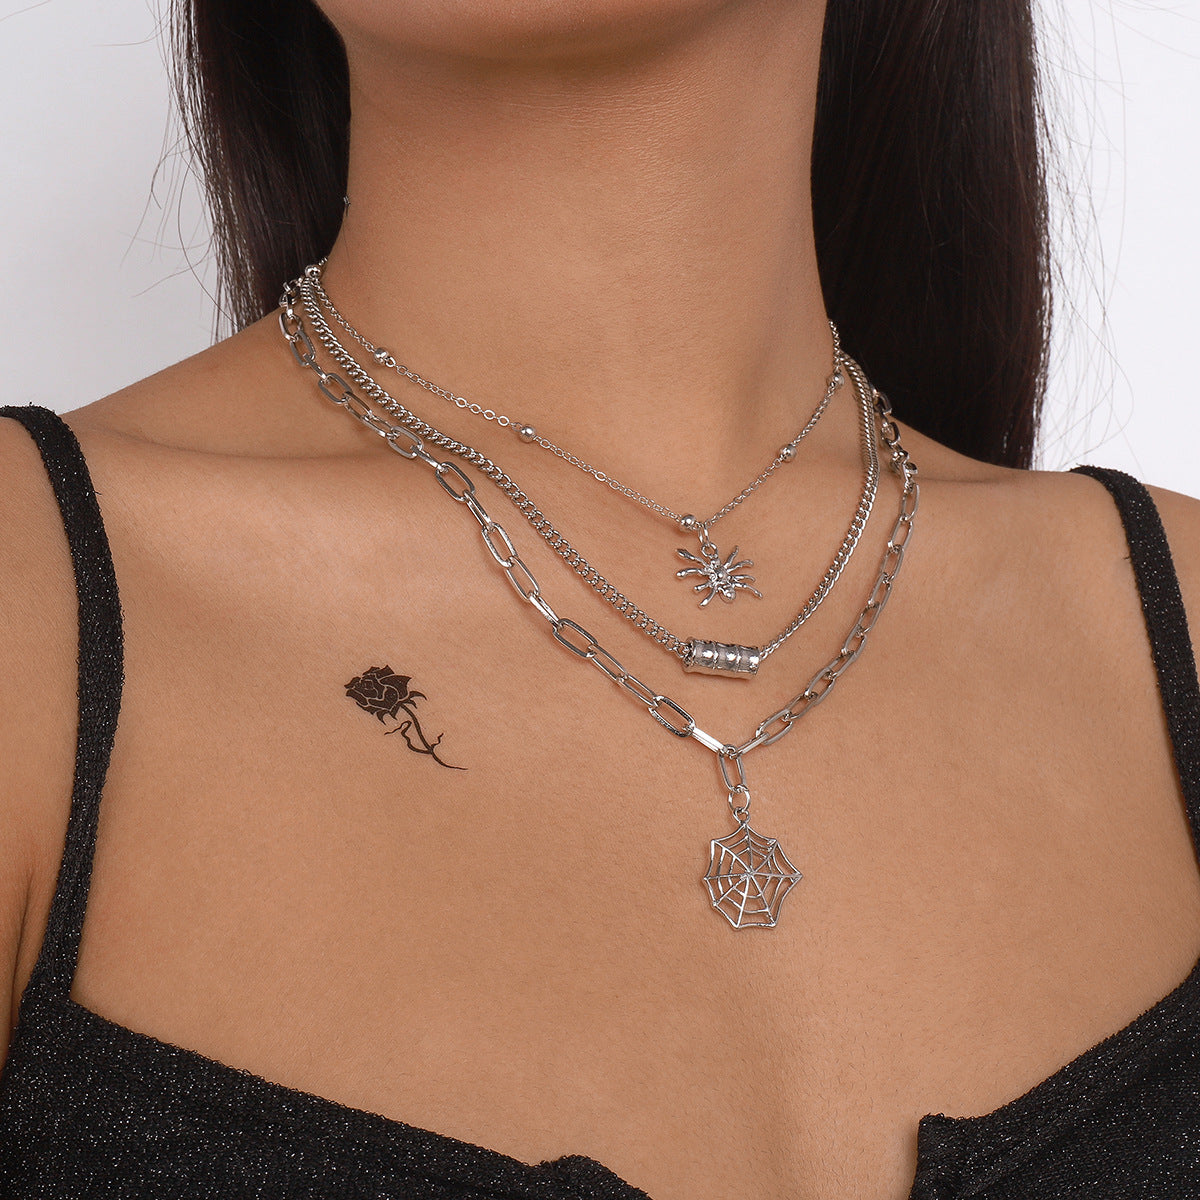 Silver-Plated Spider Web Layered Pendant Necklace